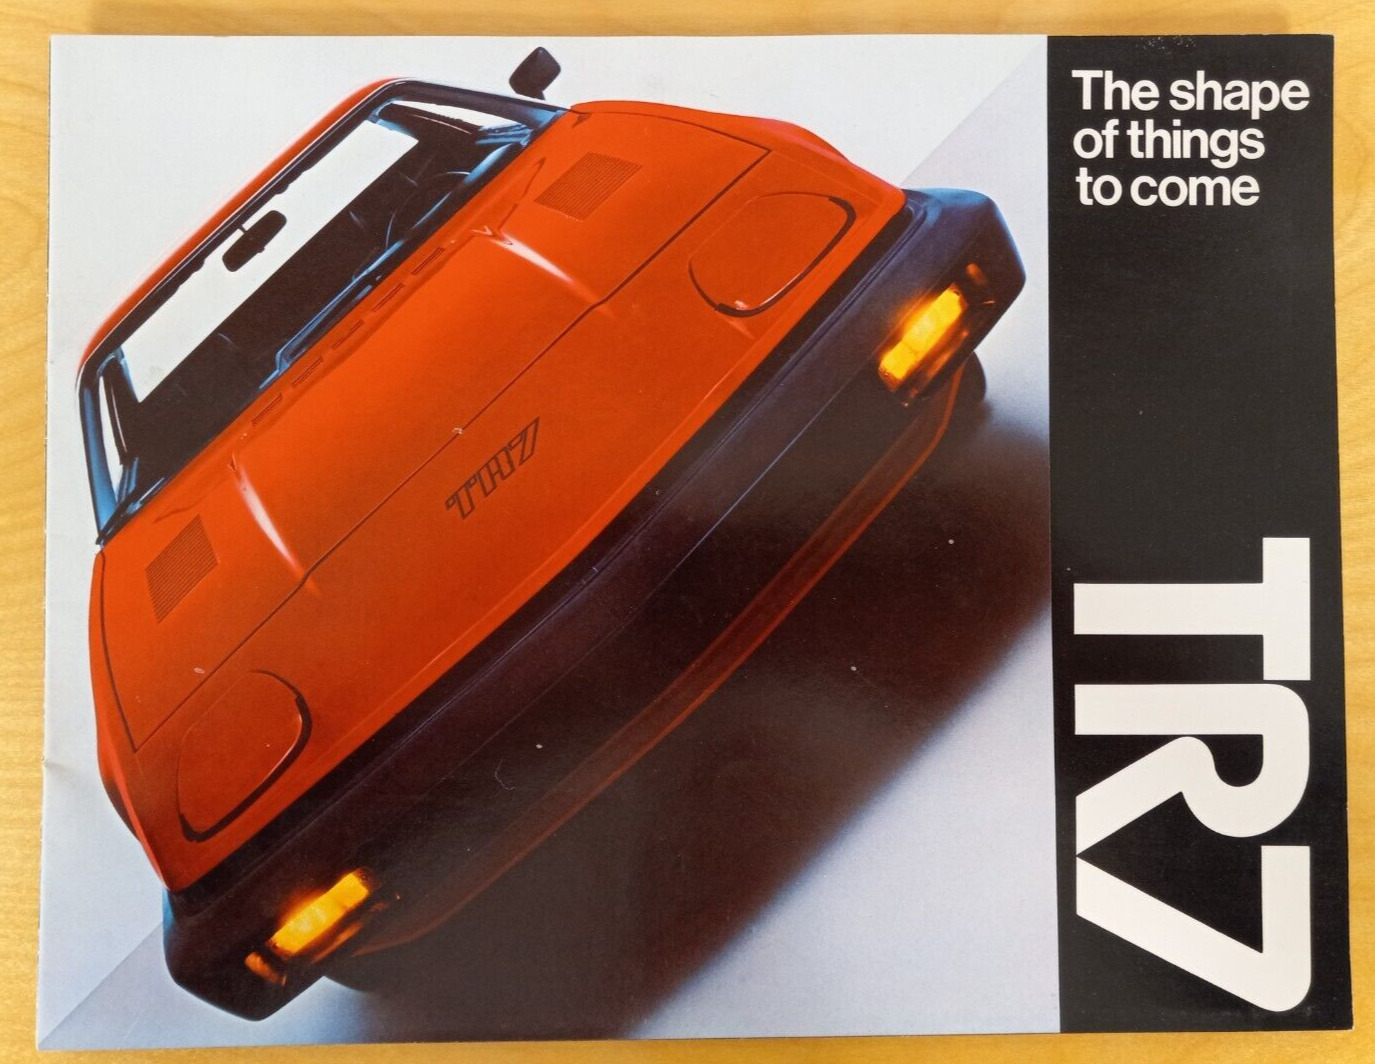 Vintage Original 1975 Triumph TR7 Sales Brochure - The Shape of Things to Come